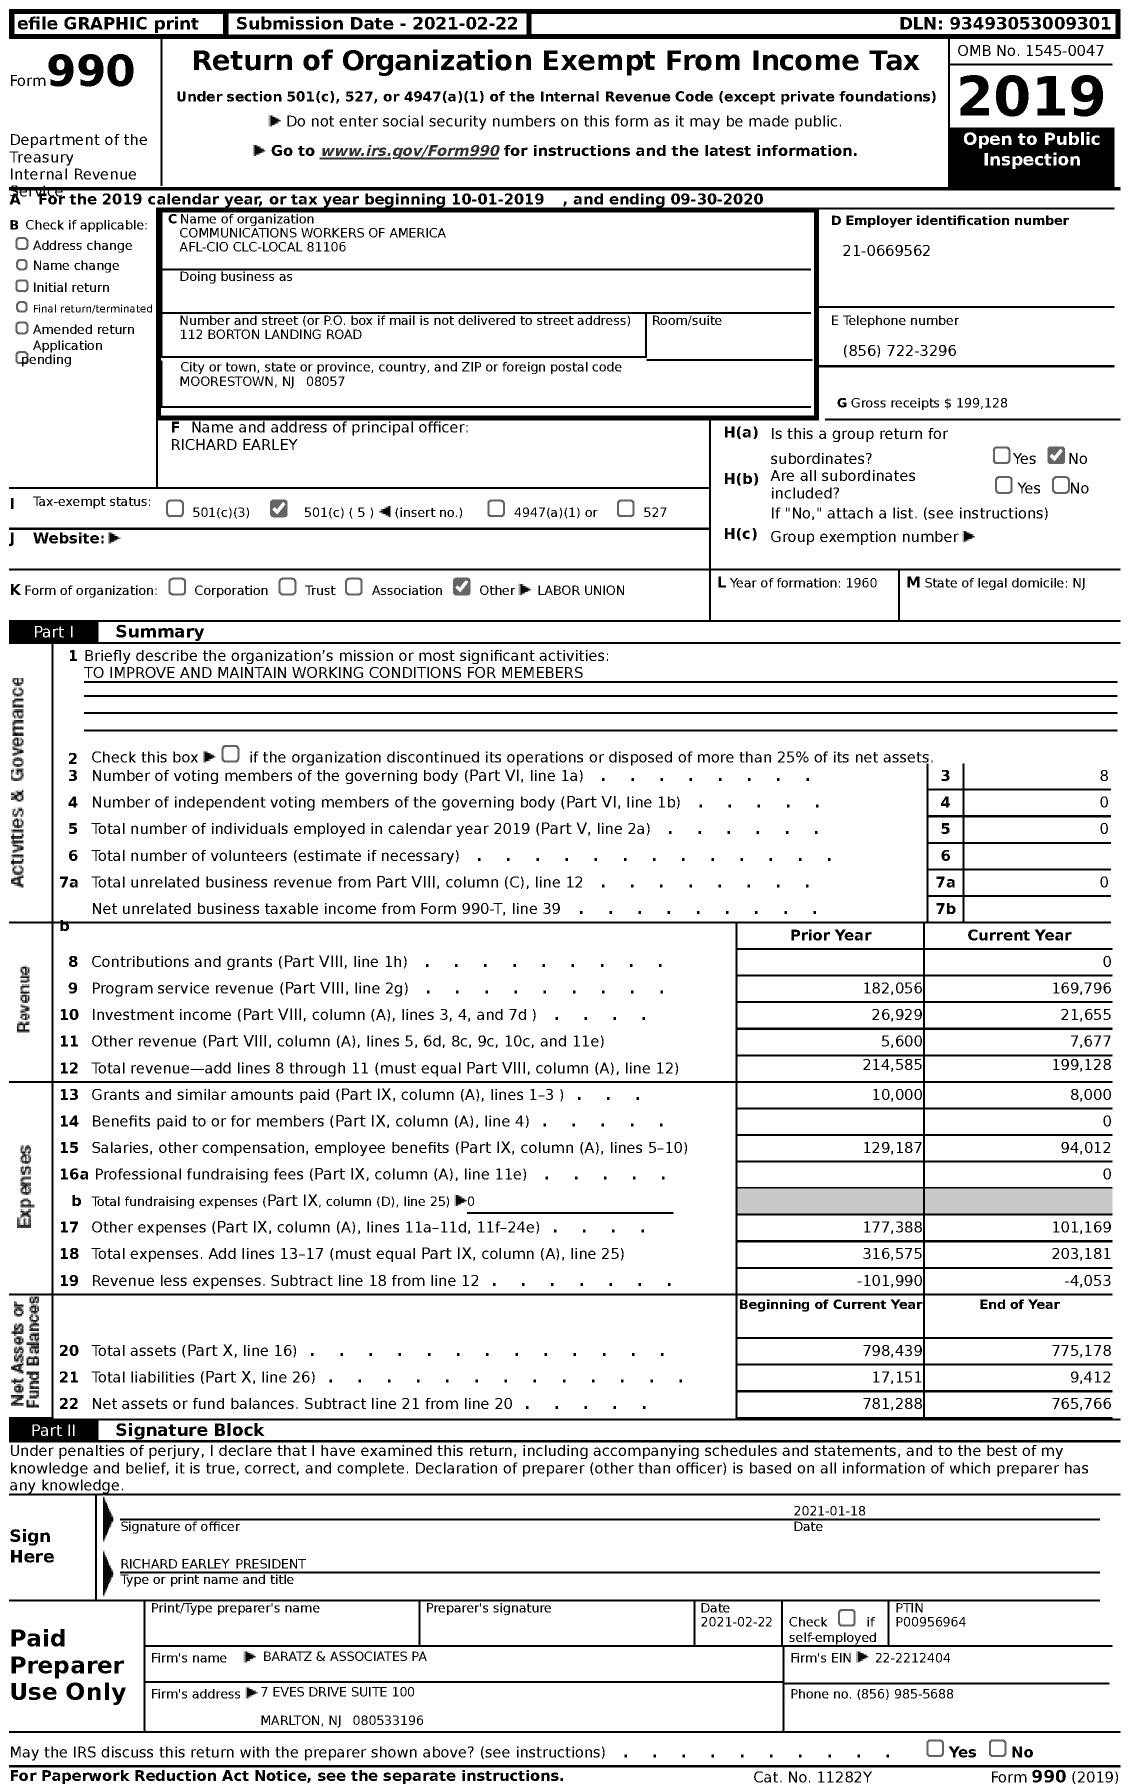 Image of first page of 2019 Form 990 for Communications Workers of America AFL-CIO Clc-Local 81106